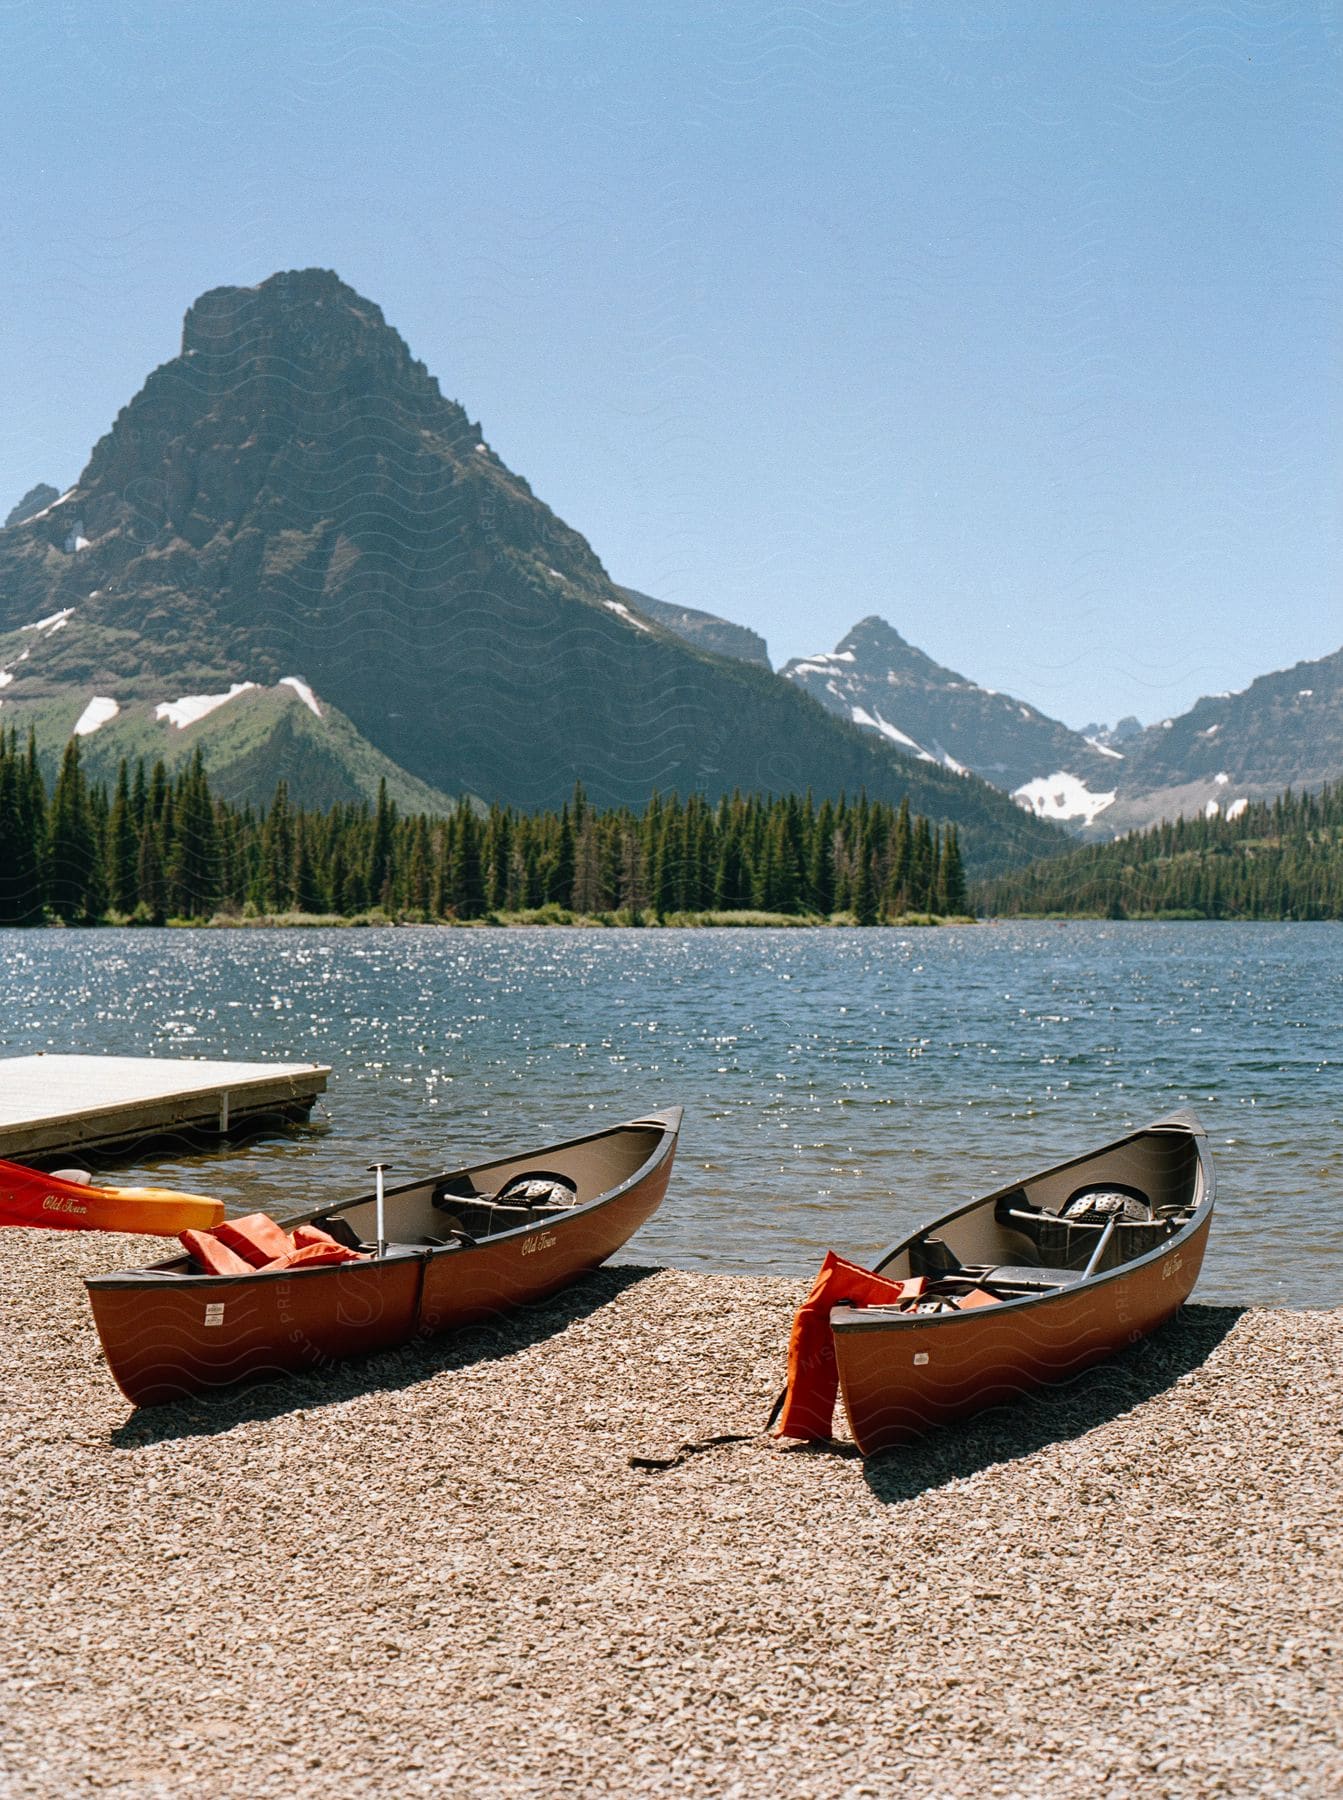 Two canoes rest on a pebble shore beside a serene lake with a mountain and clear sky in the background